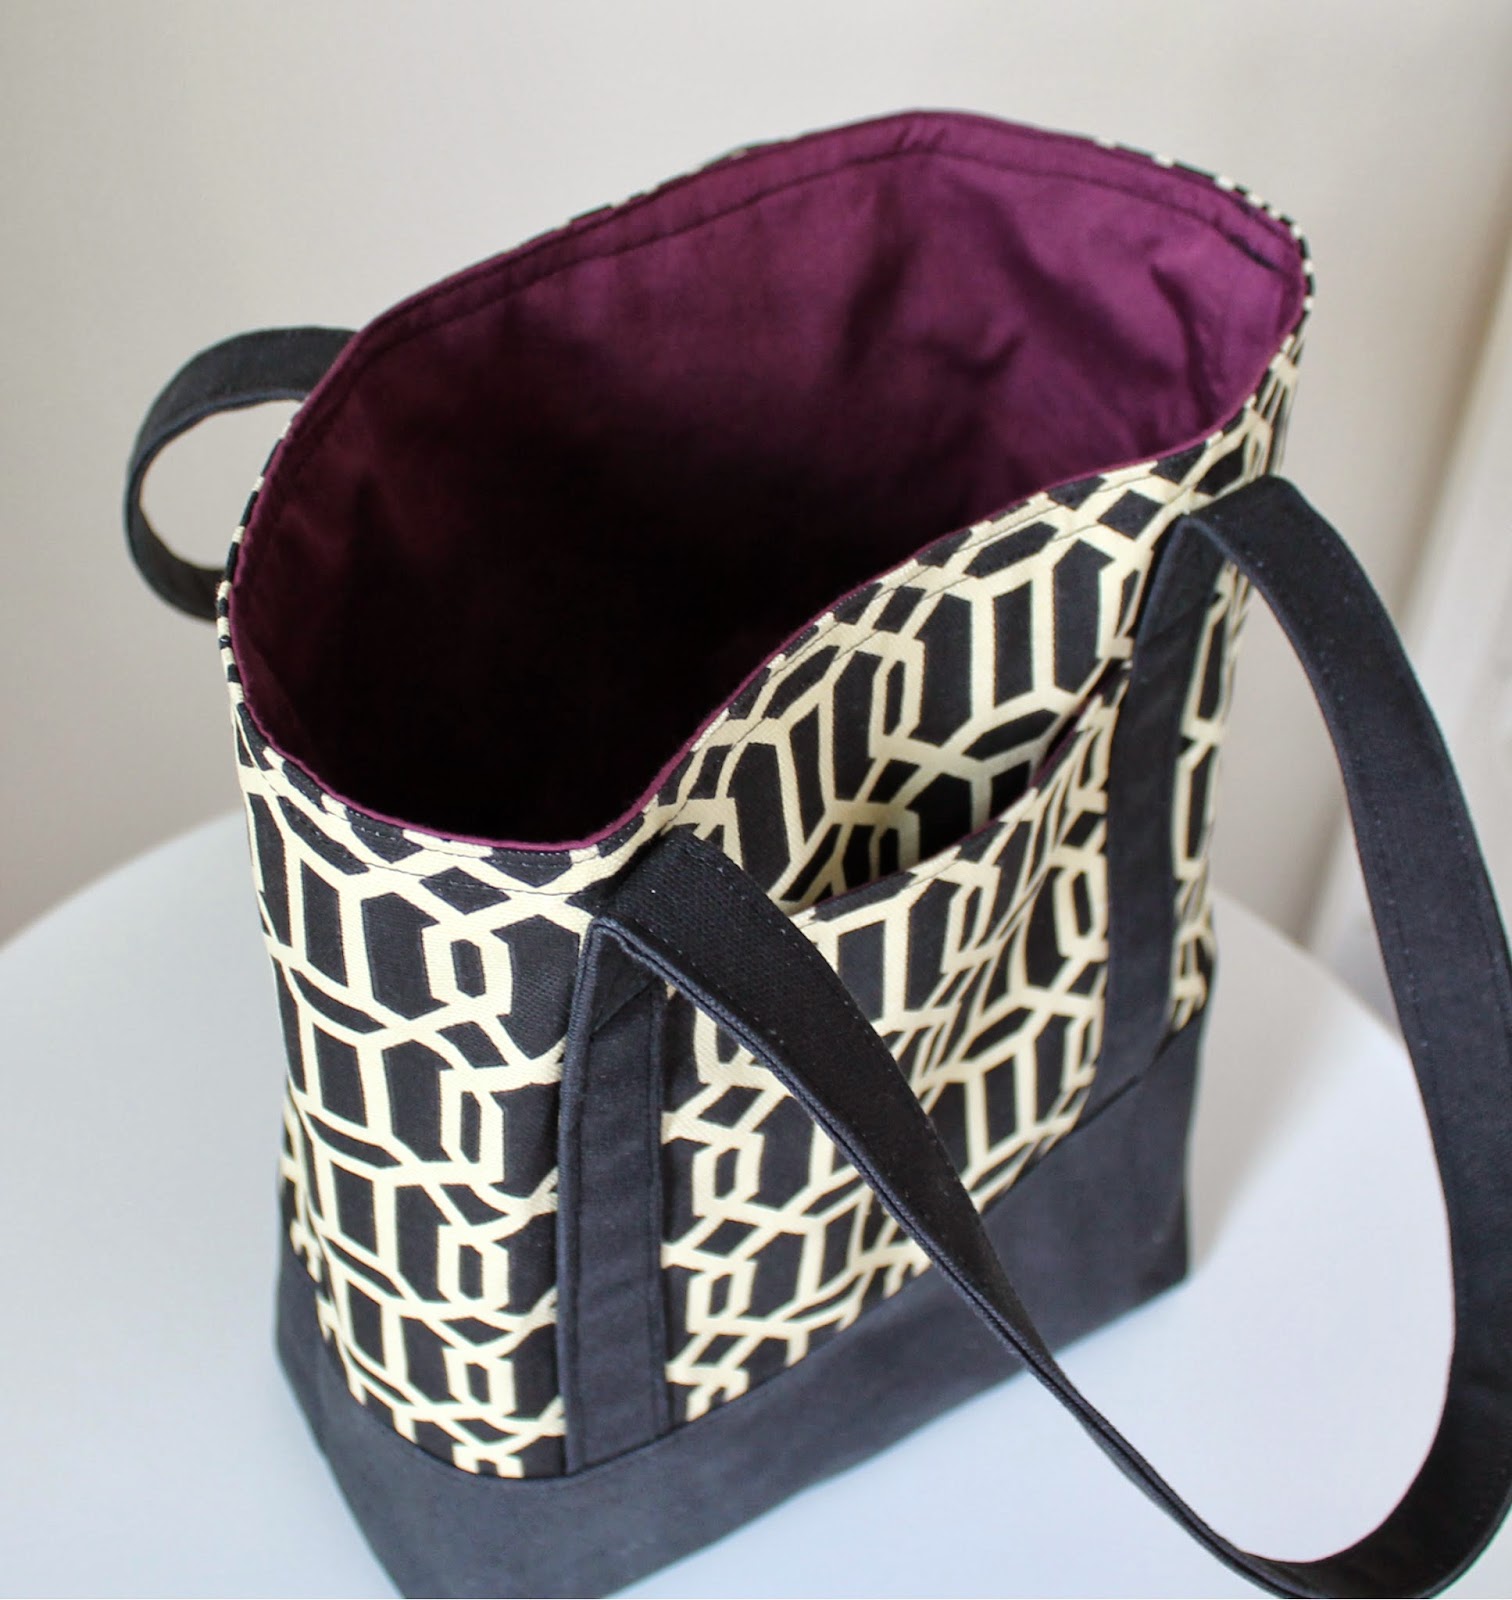 Easy-BakeCoven Tote bag - Rody Sewing